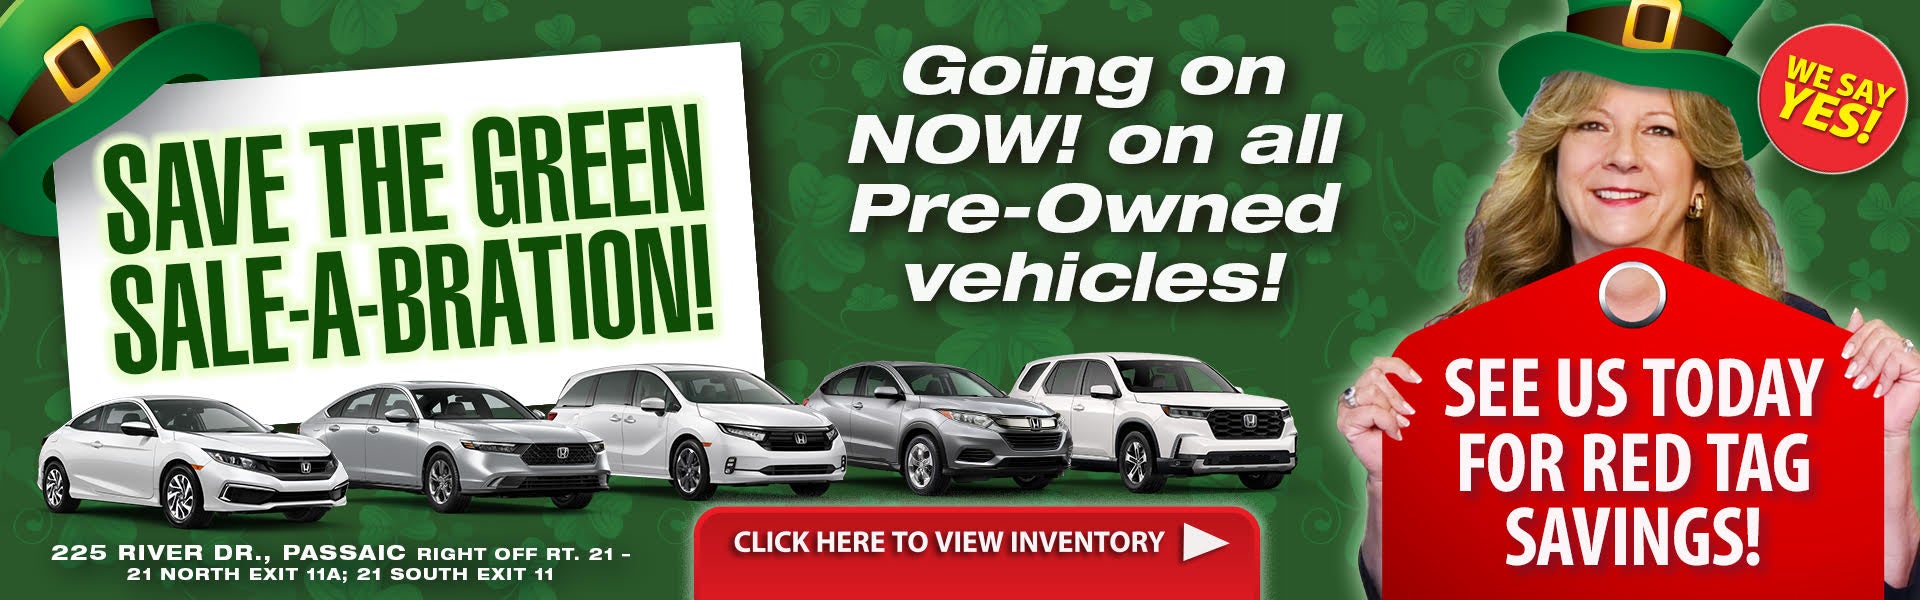 200+ Quality Pre-Owned Vehicles for You! 